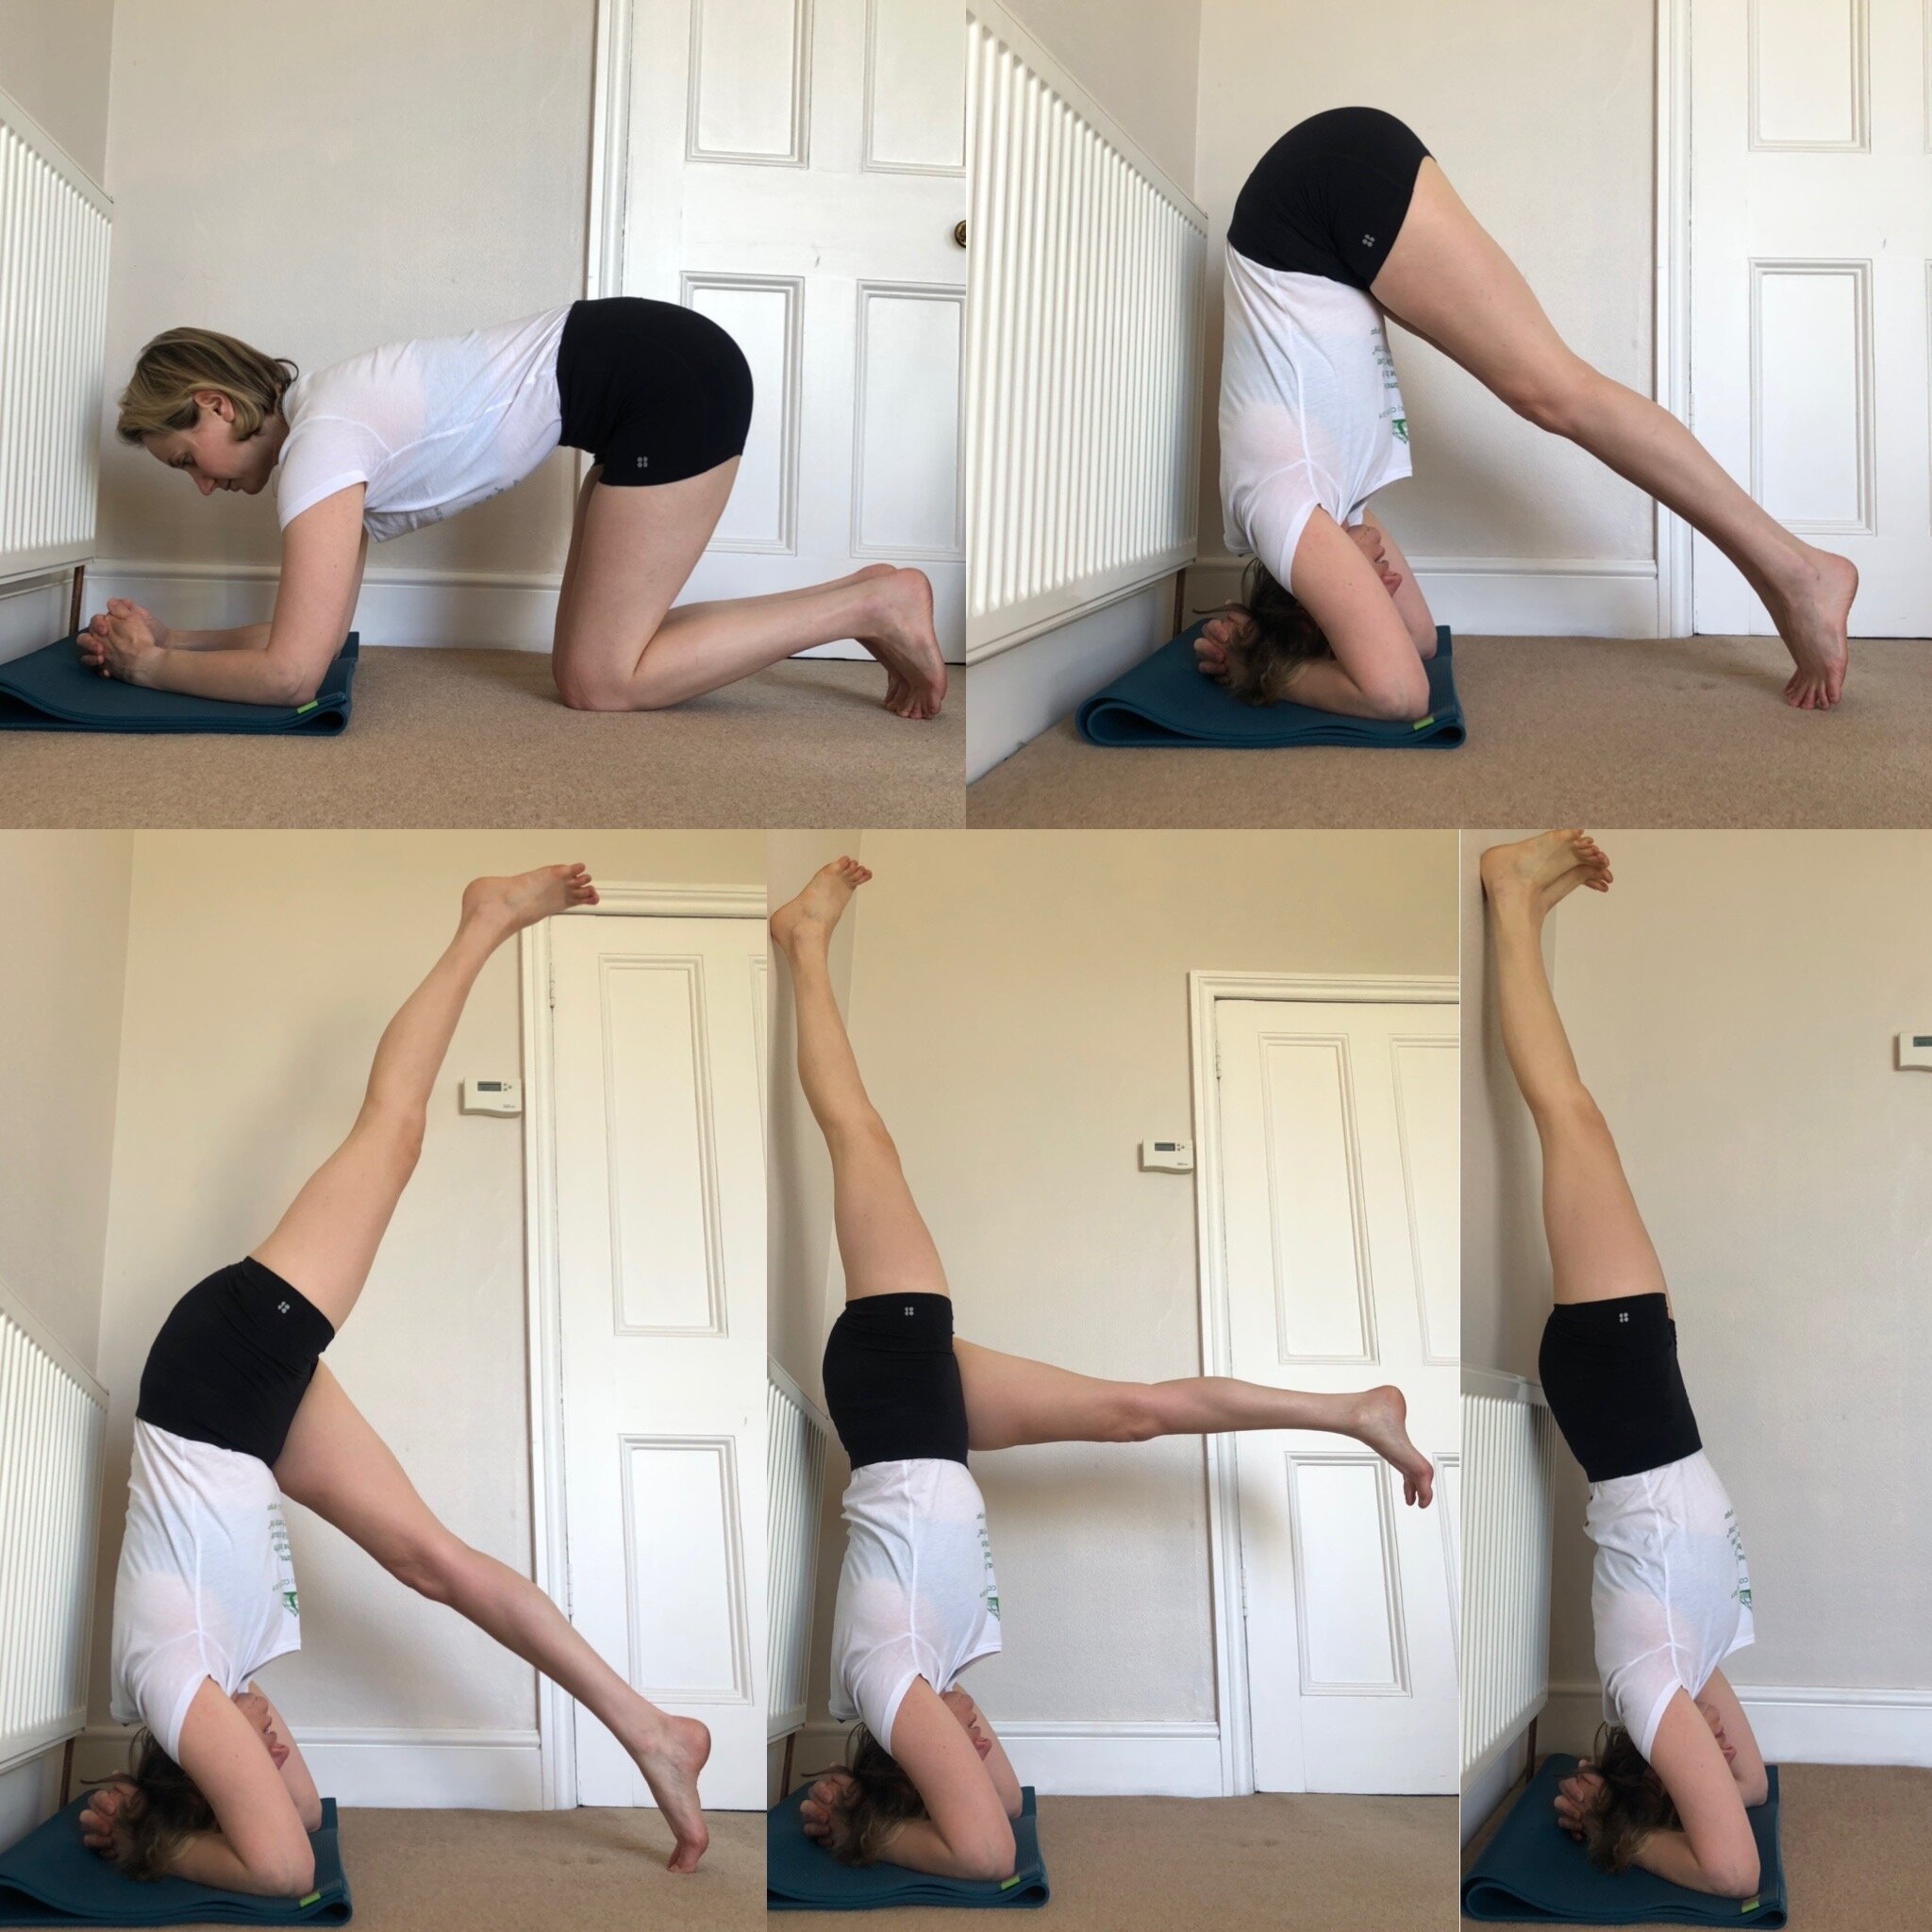 How to Headstand 